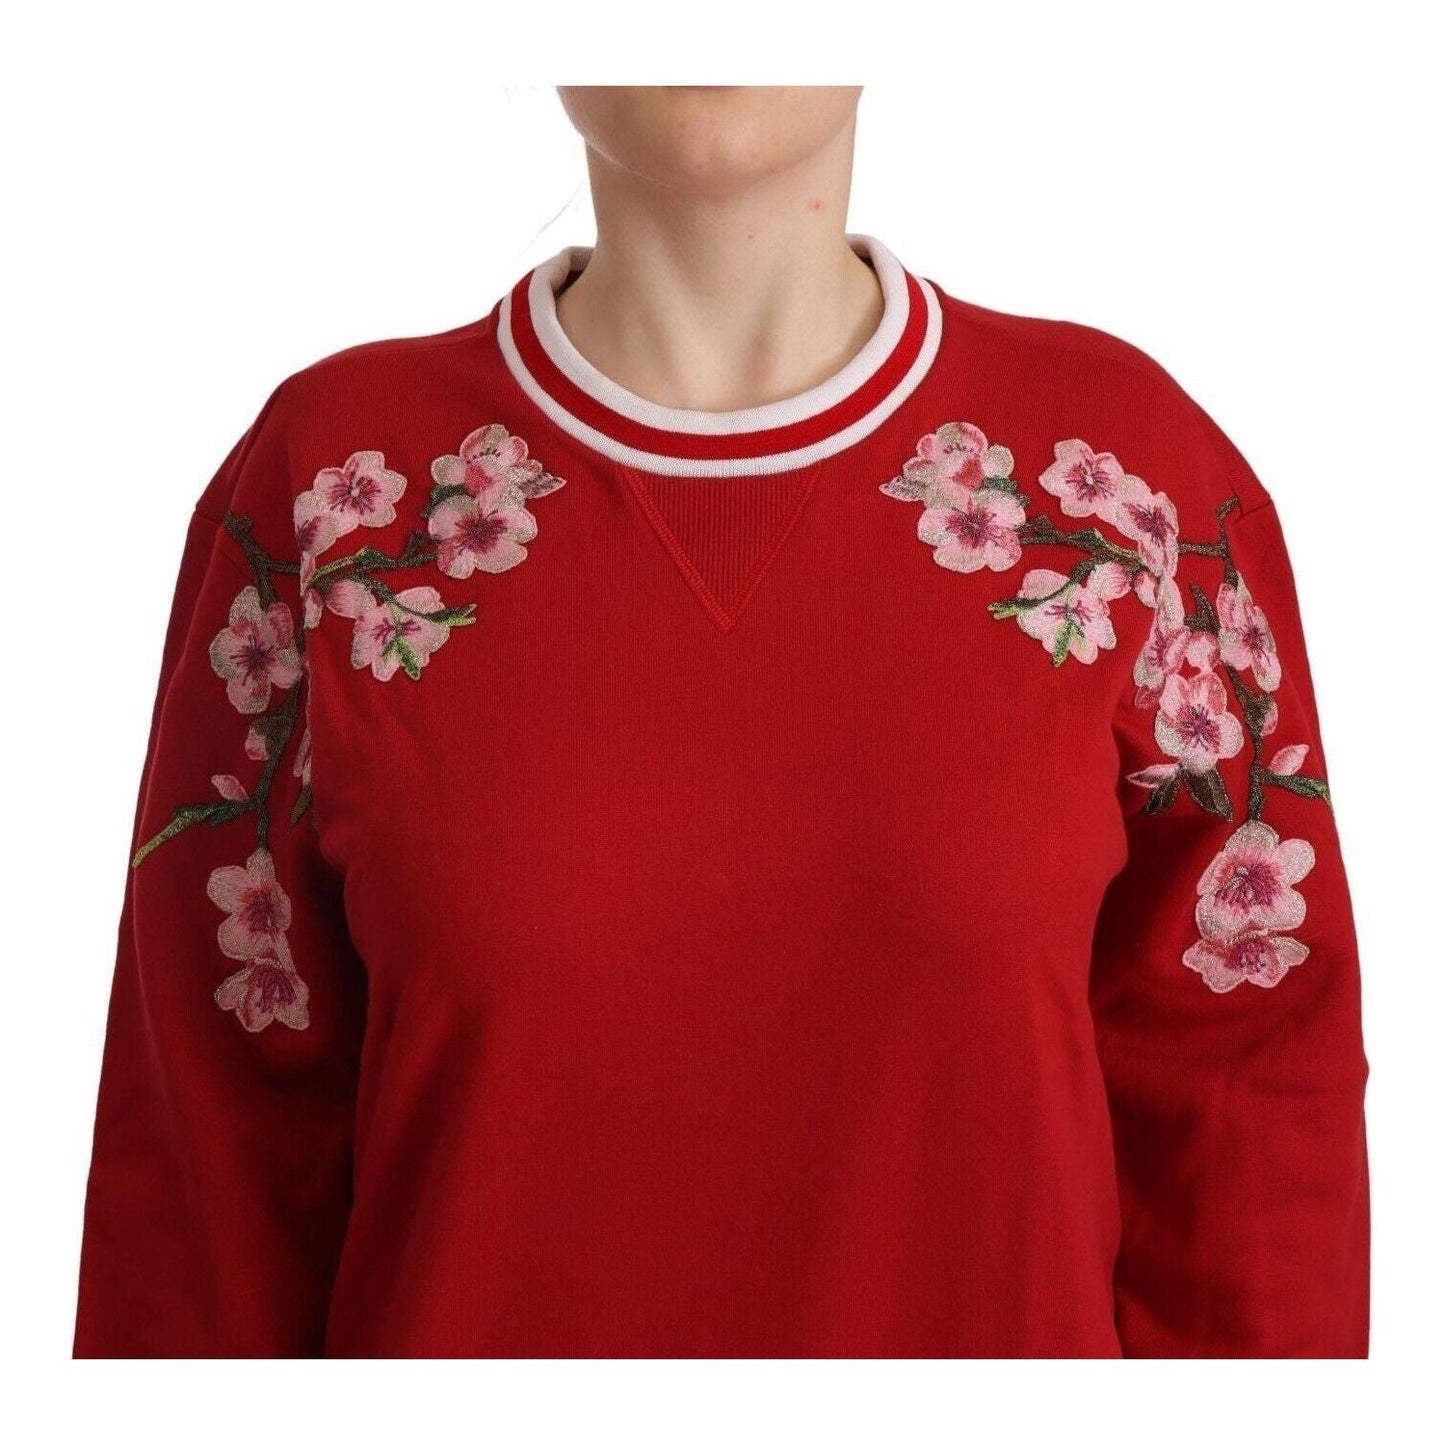 Dolce & Gabbana Elegant Red Crewneck Pullover with Floral Motif red-cotton-crewneck-dglove-pullover-sweater WOMAN SWEATERS s-l1600-3-17-189e9cc3-e04.jpg